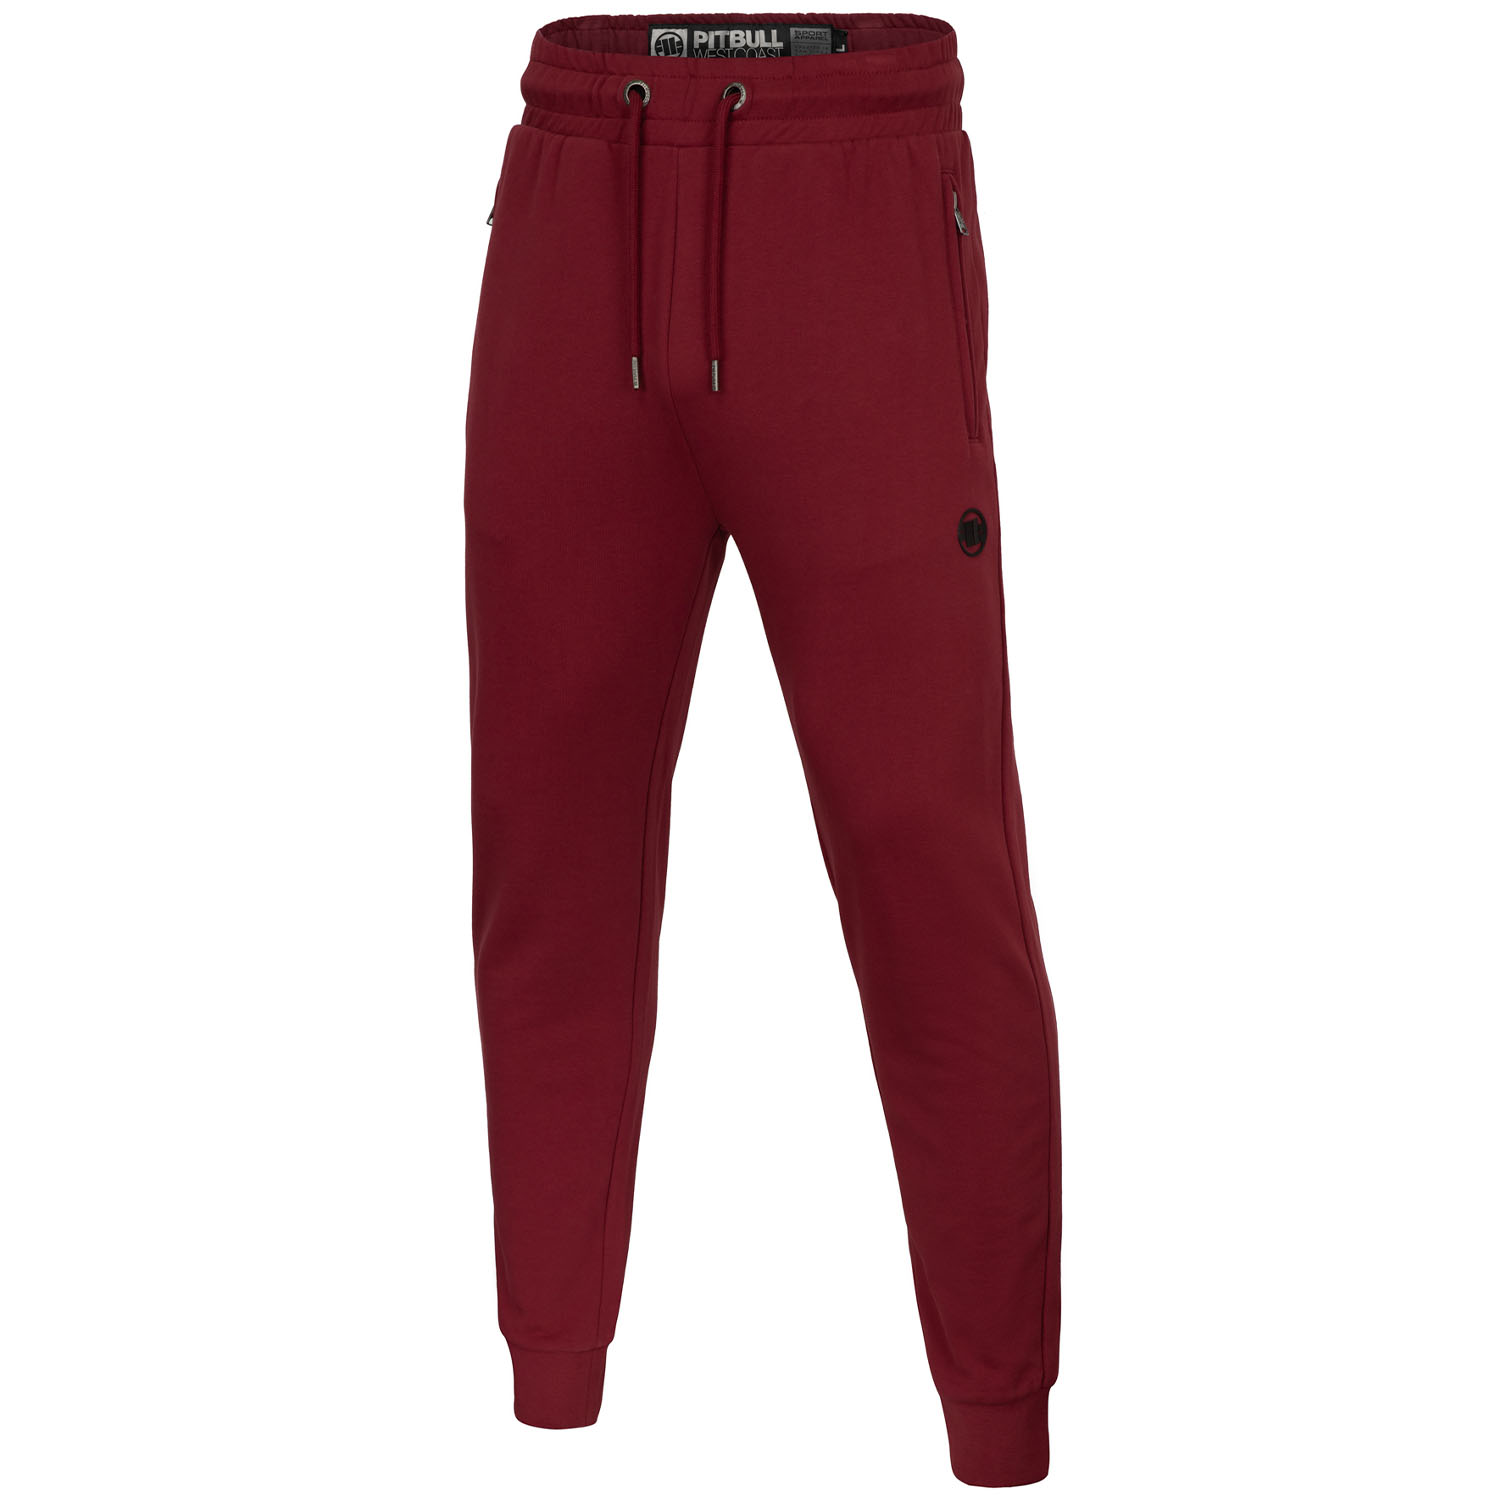 Pit Bull West Coast, Jogging Pants, Everts, wine red